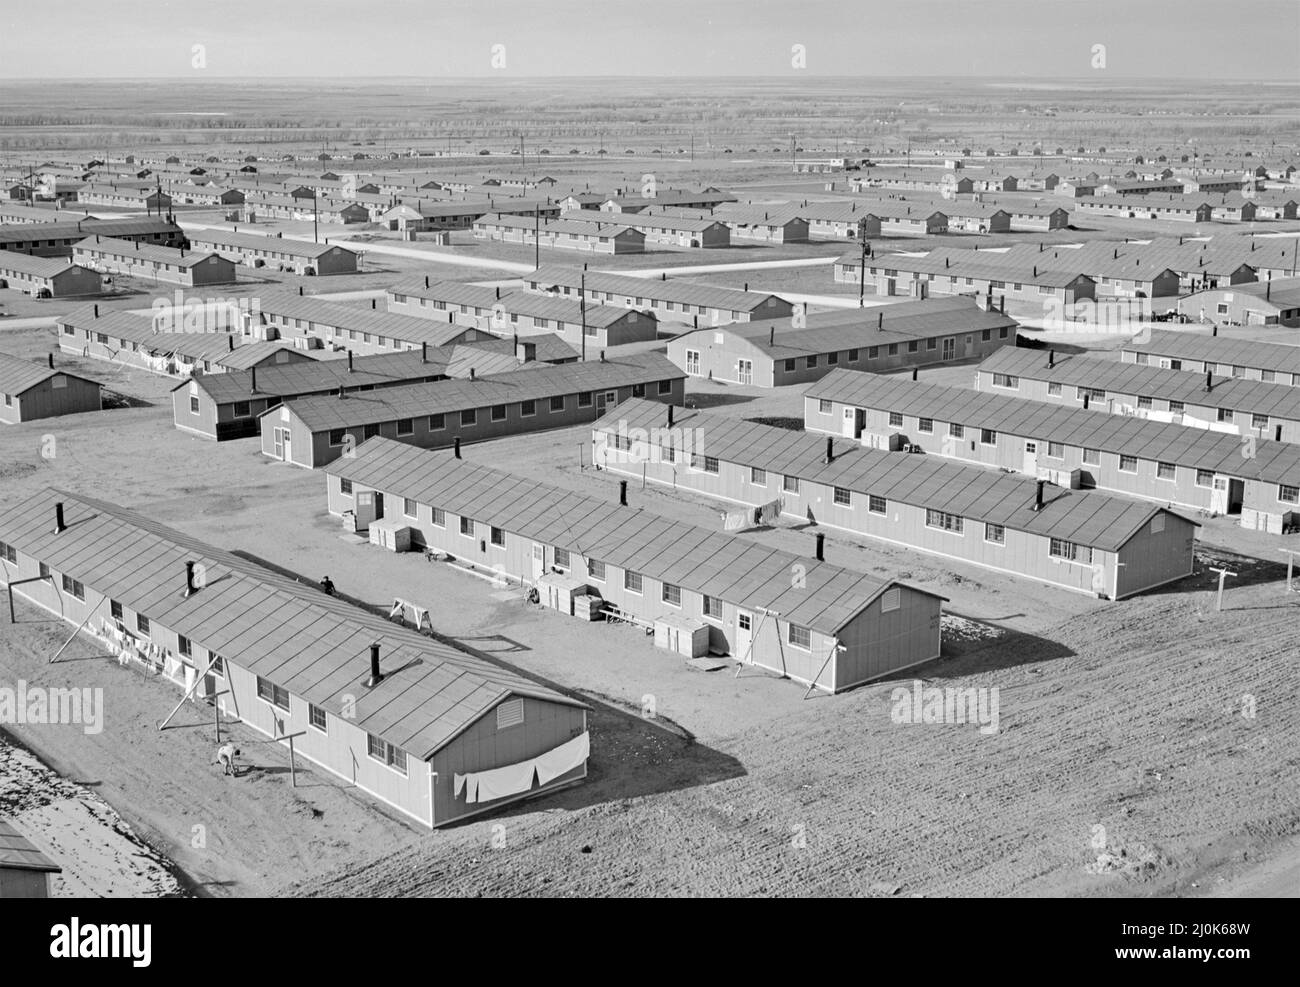 Aerial view of the Granada Relocation Center, an internment camp for Americans of Japanese descent during World War II, November 30, 1943 in Amache, Colorado. The site of Camp Amache was declared a National Historic Site by President Joe Biden on March 18, 2022. Stock Photo